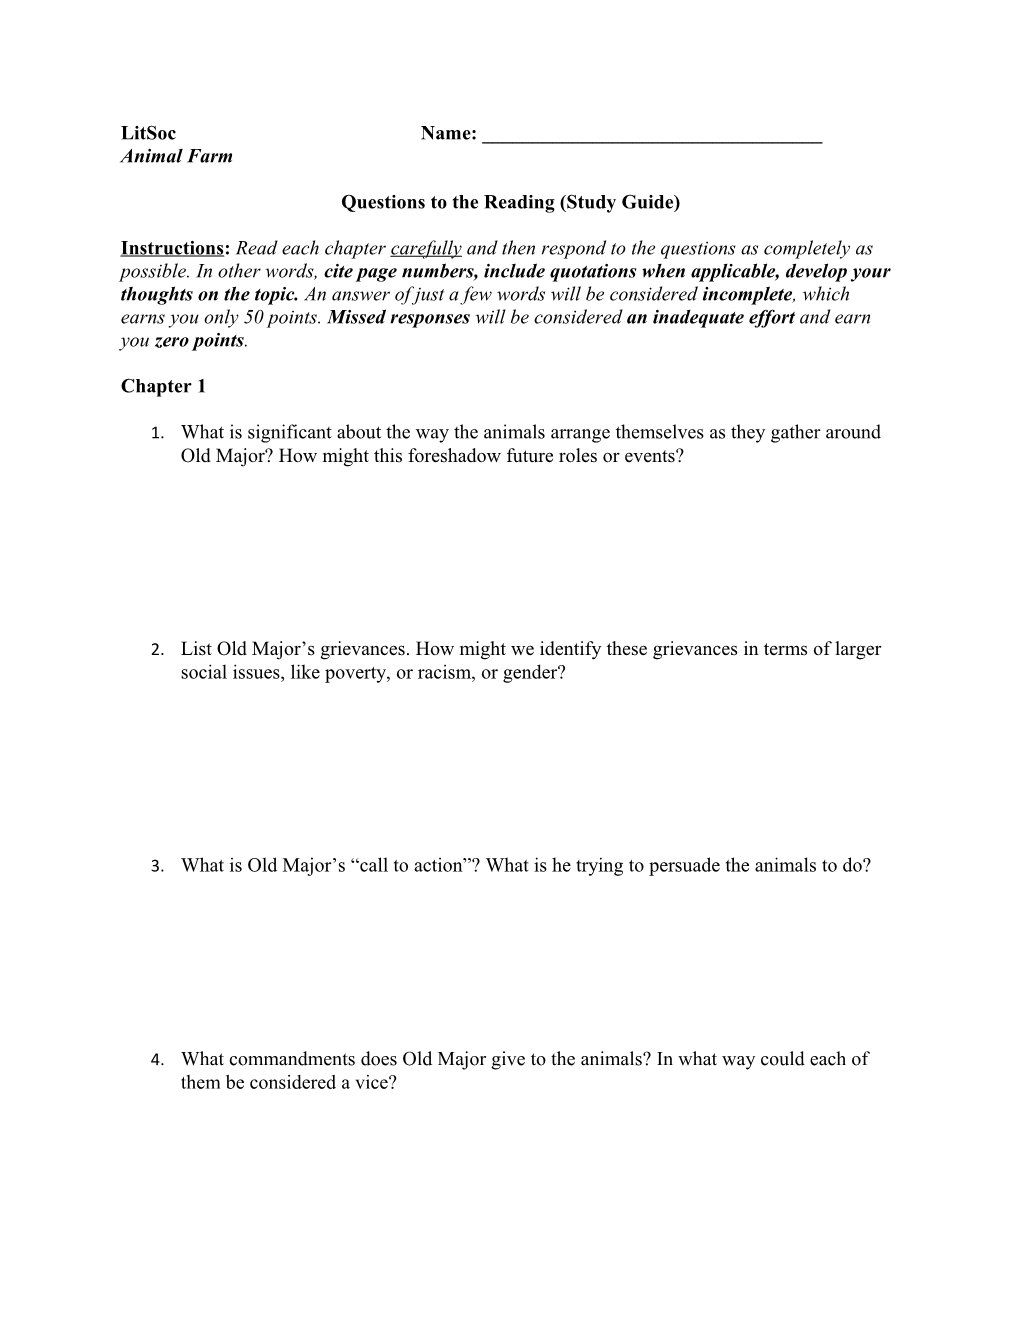 Questions to the Reading (Study Guide)